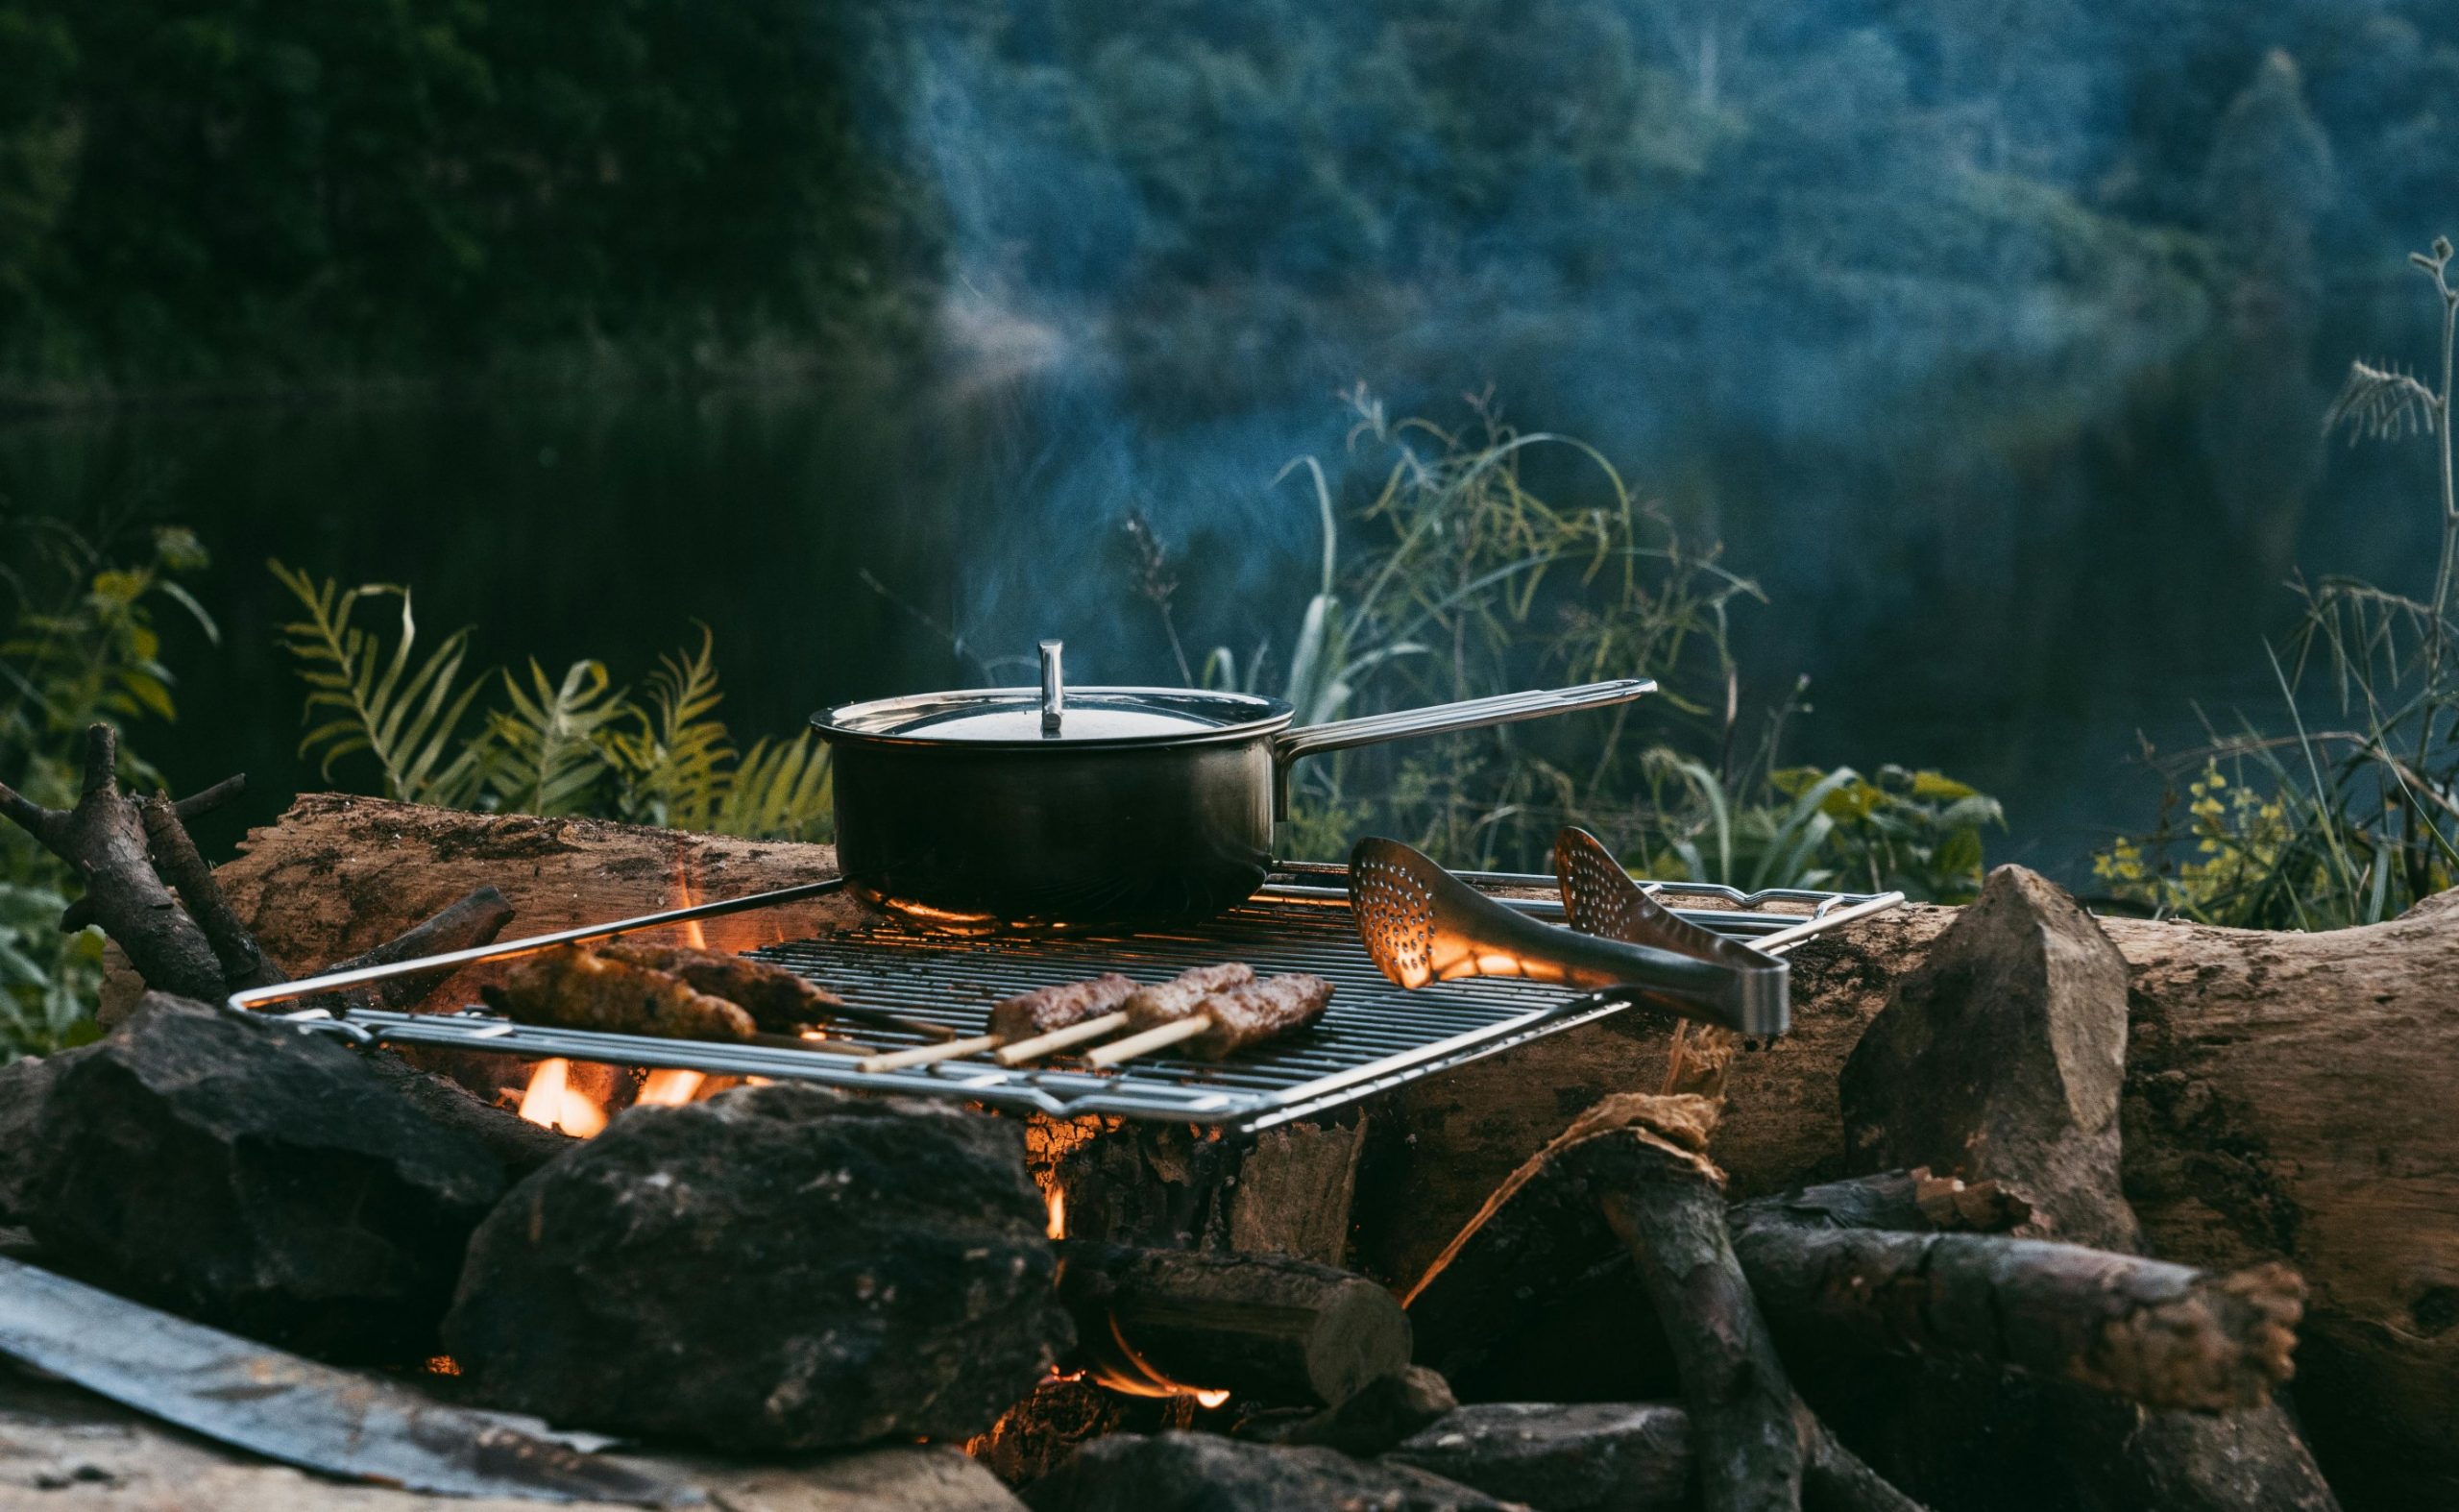 You are currently viewing Camping Food Ideas – 5 Delicious Campfire Recipes